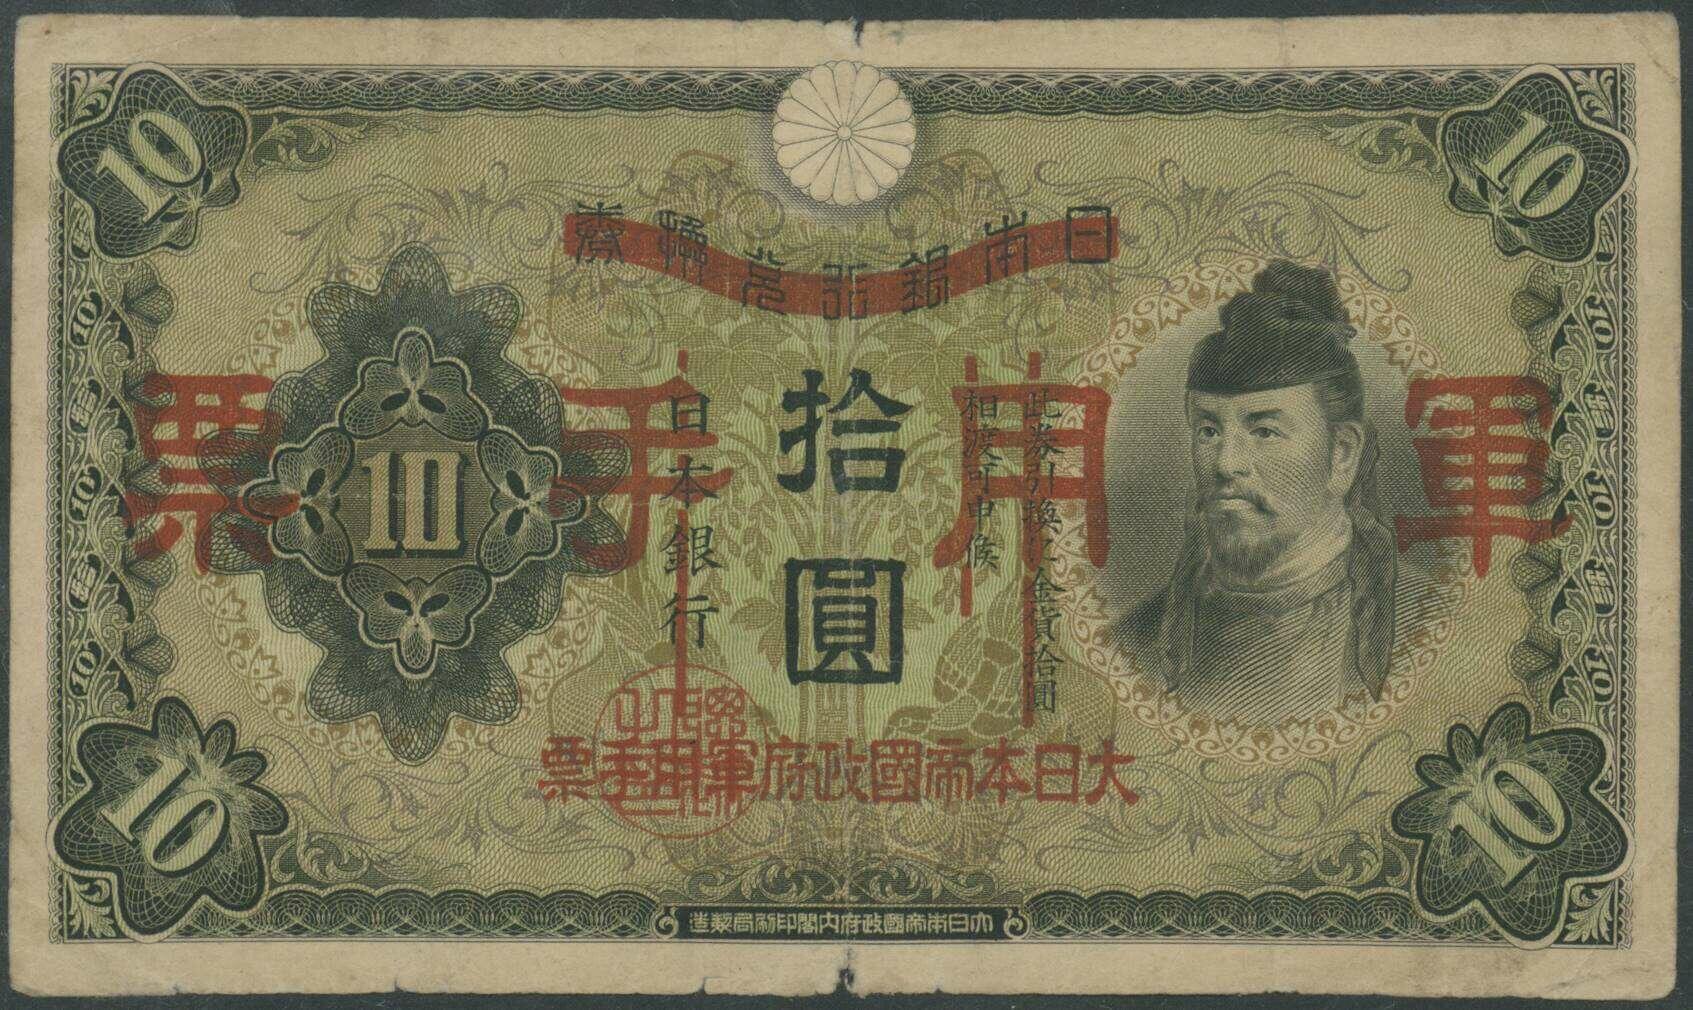 110.570: Banknotes - Asia (incl. Near East)